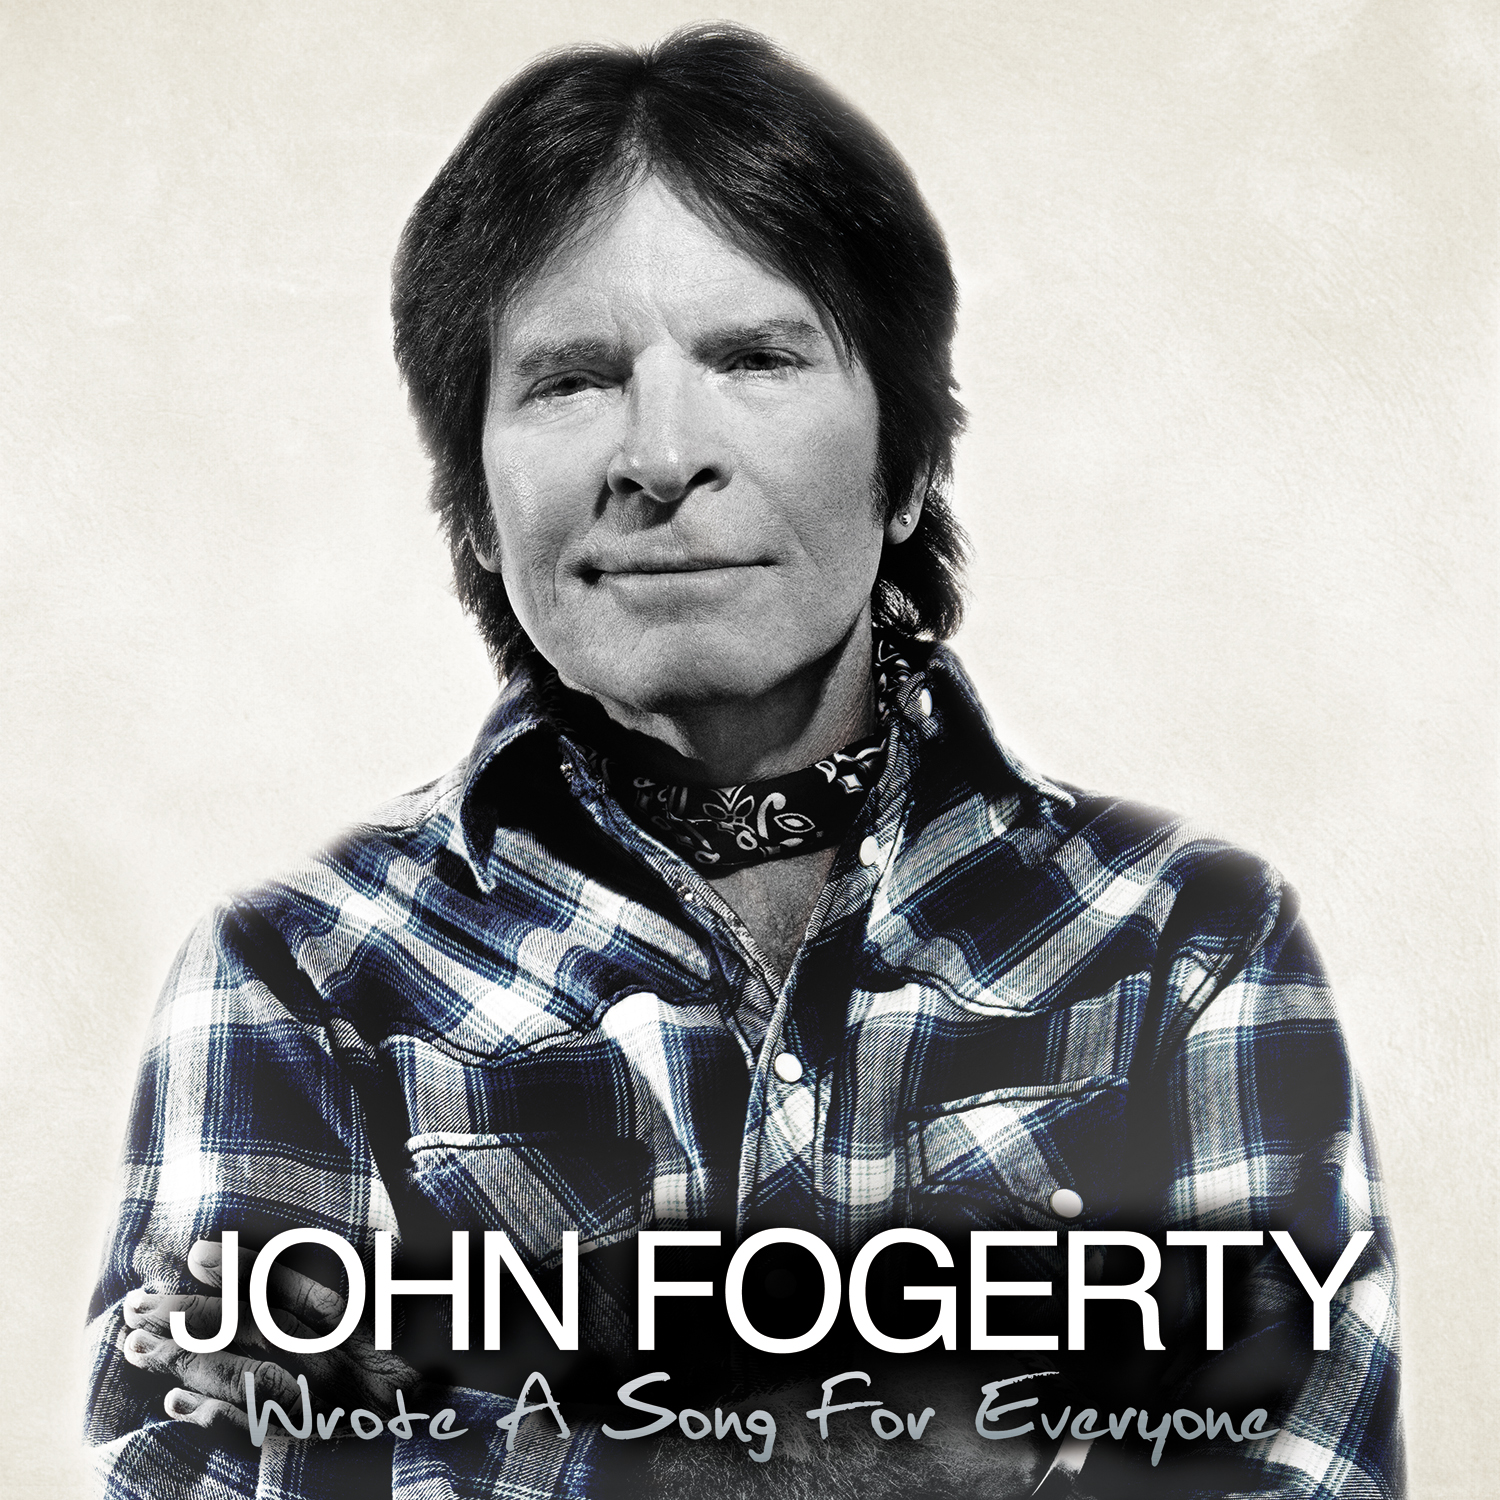 John Fogerty: Wrote A Song For Everyone